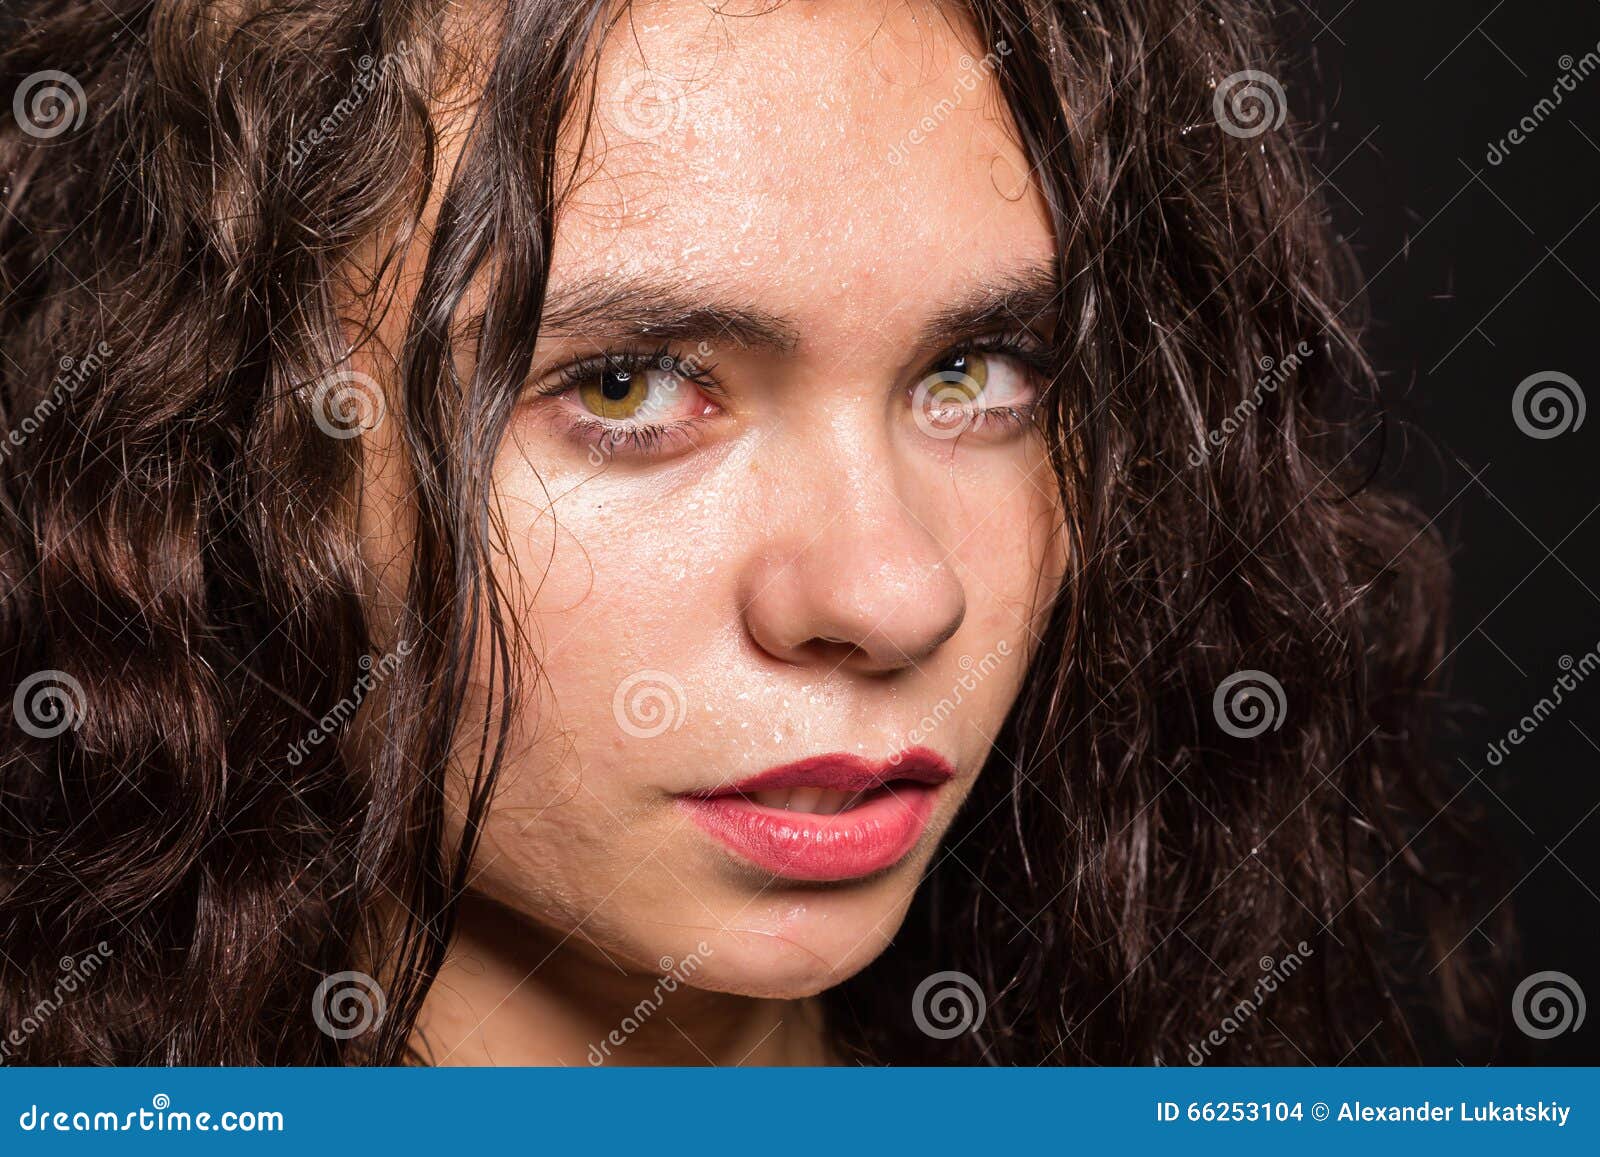 The Beautiful Sports Girl on a Dark Background Stock Photo - Image of ...